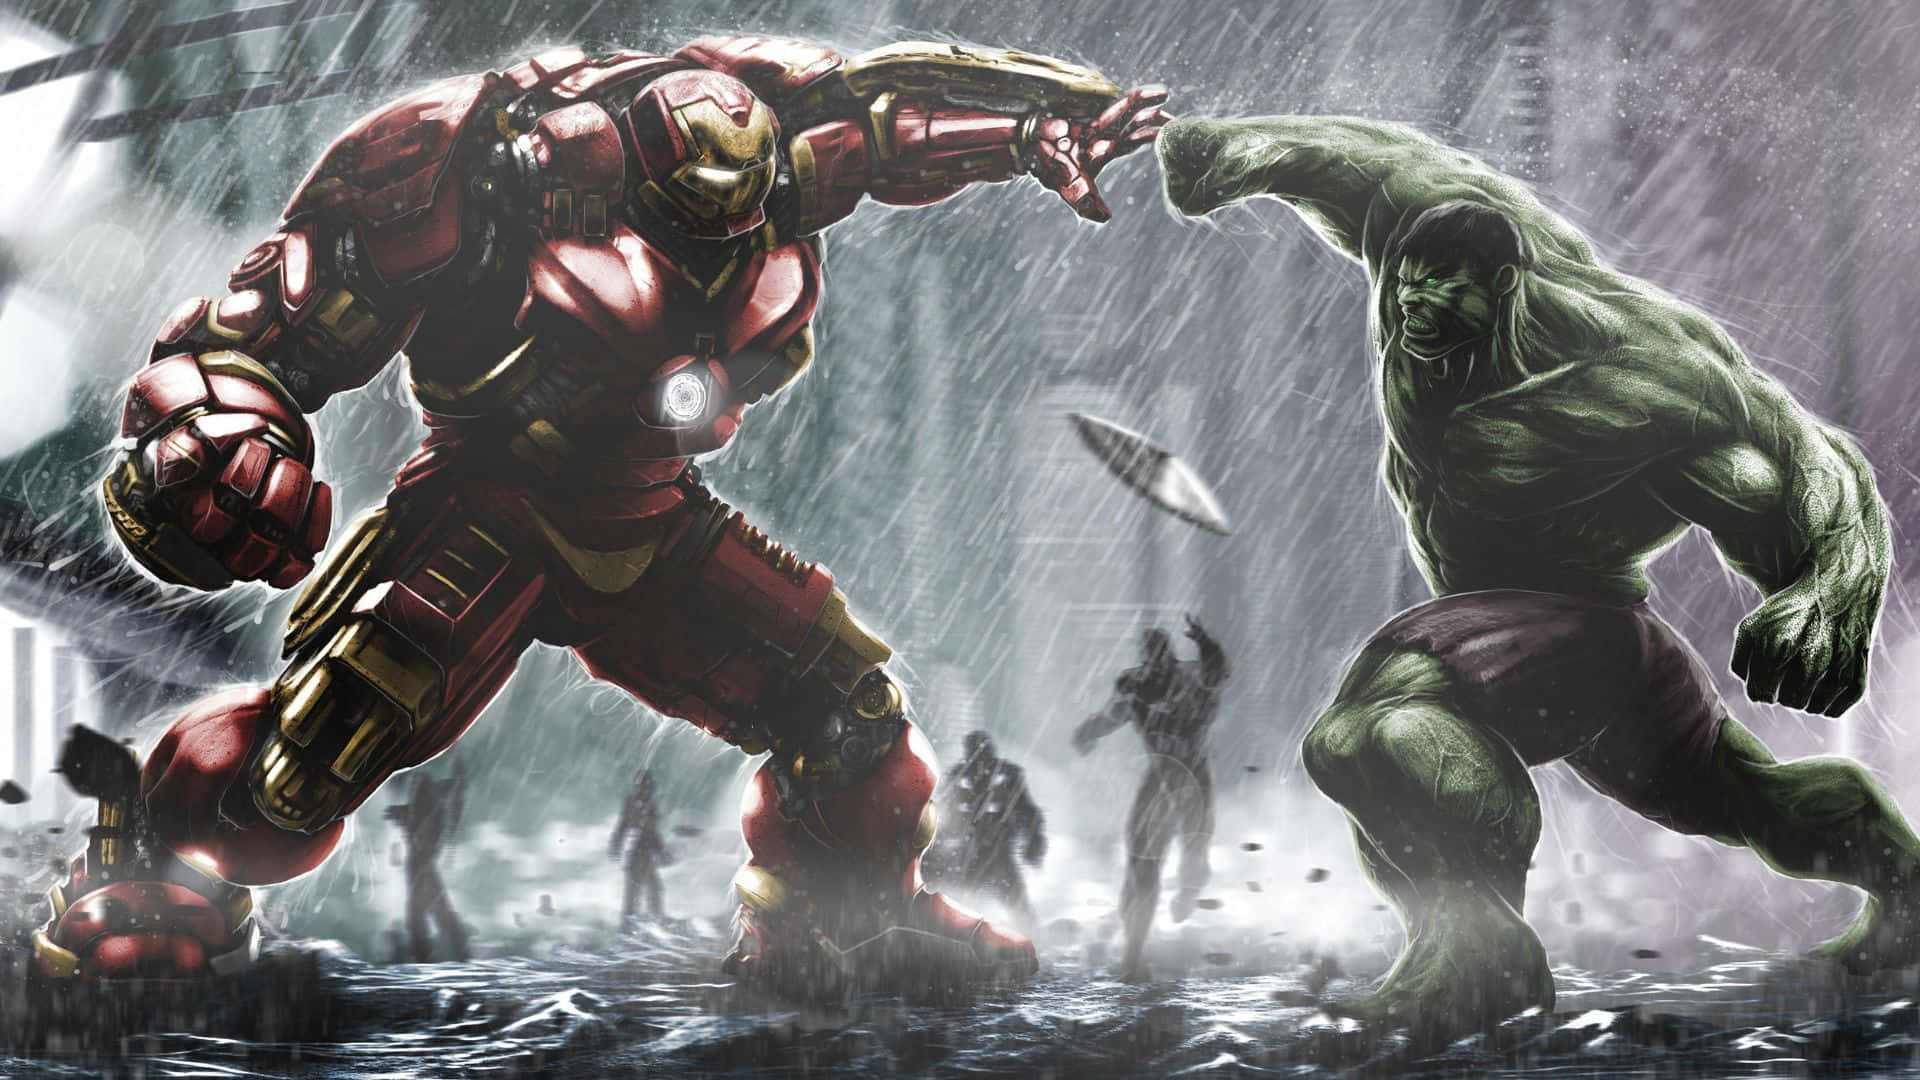 Watch in awe as superheroes Iron Man and Hulk face off. Wallpaper